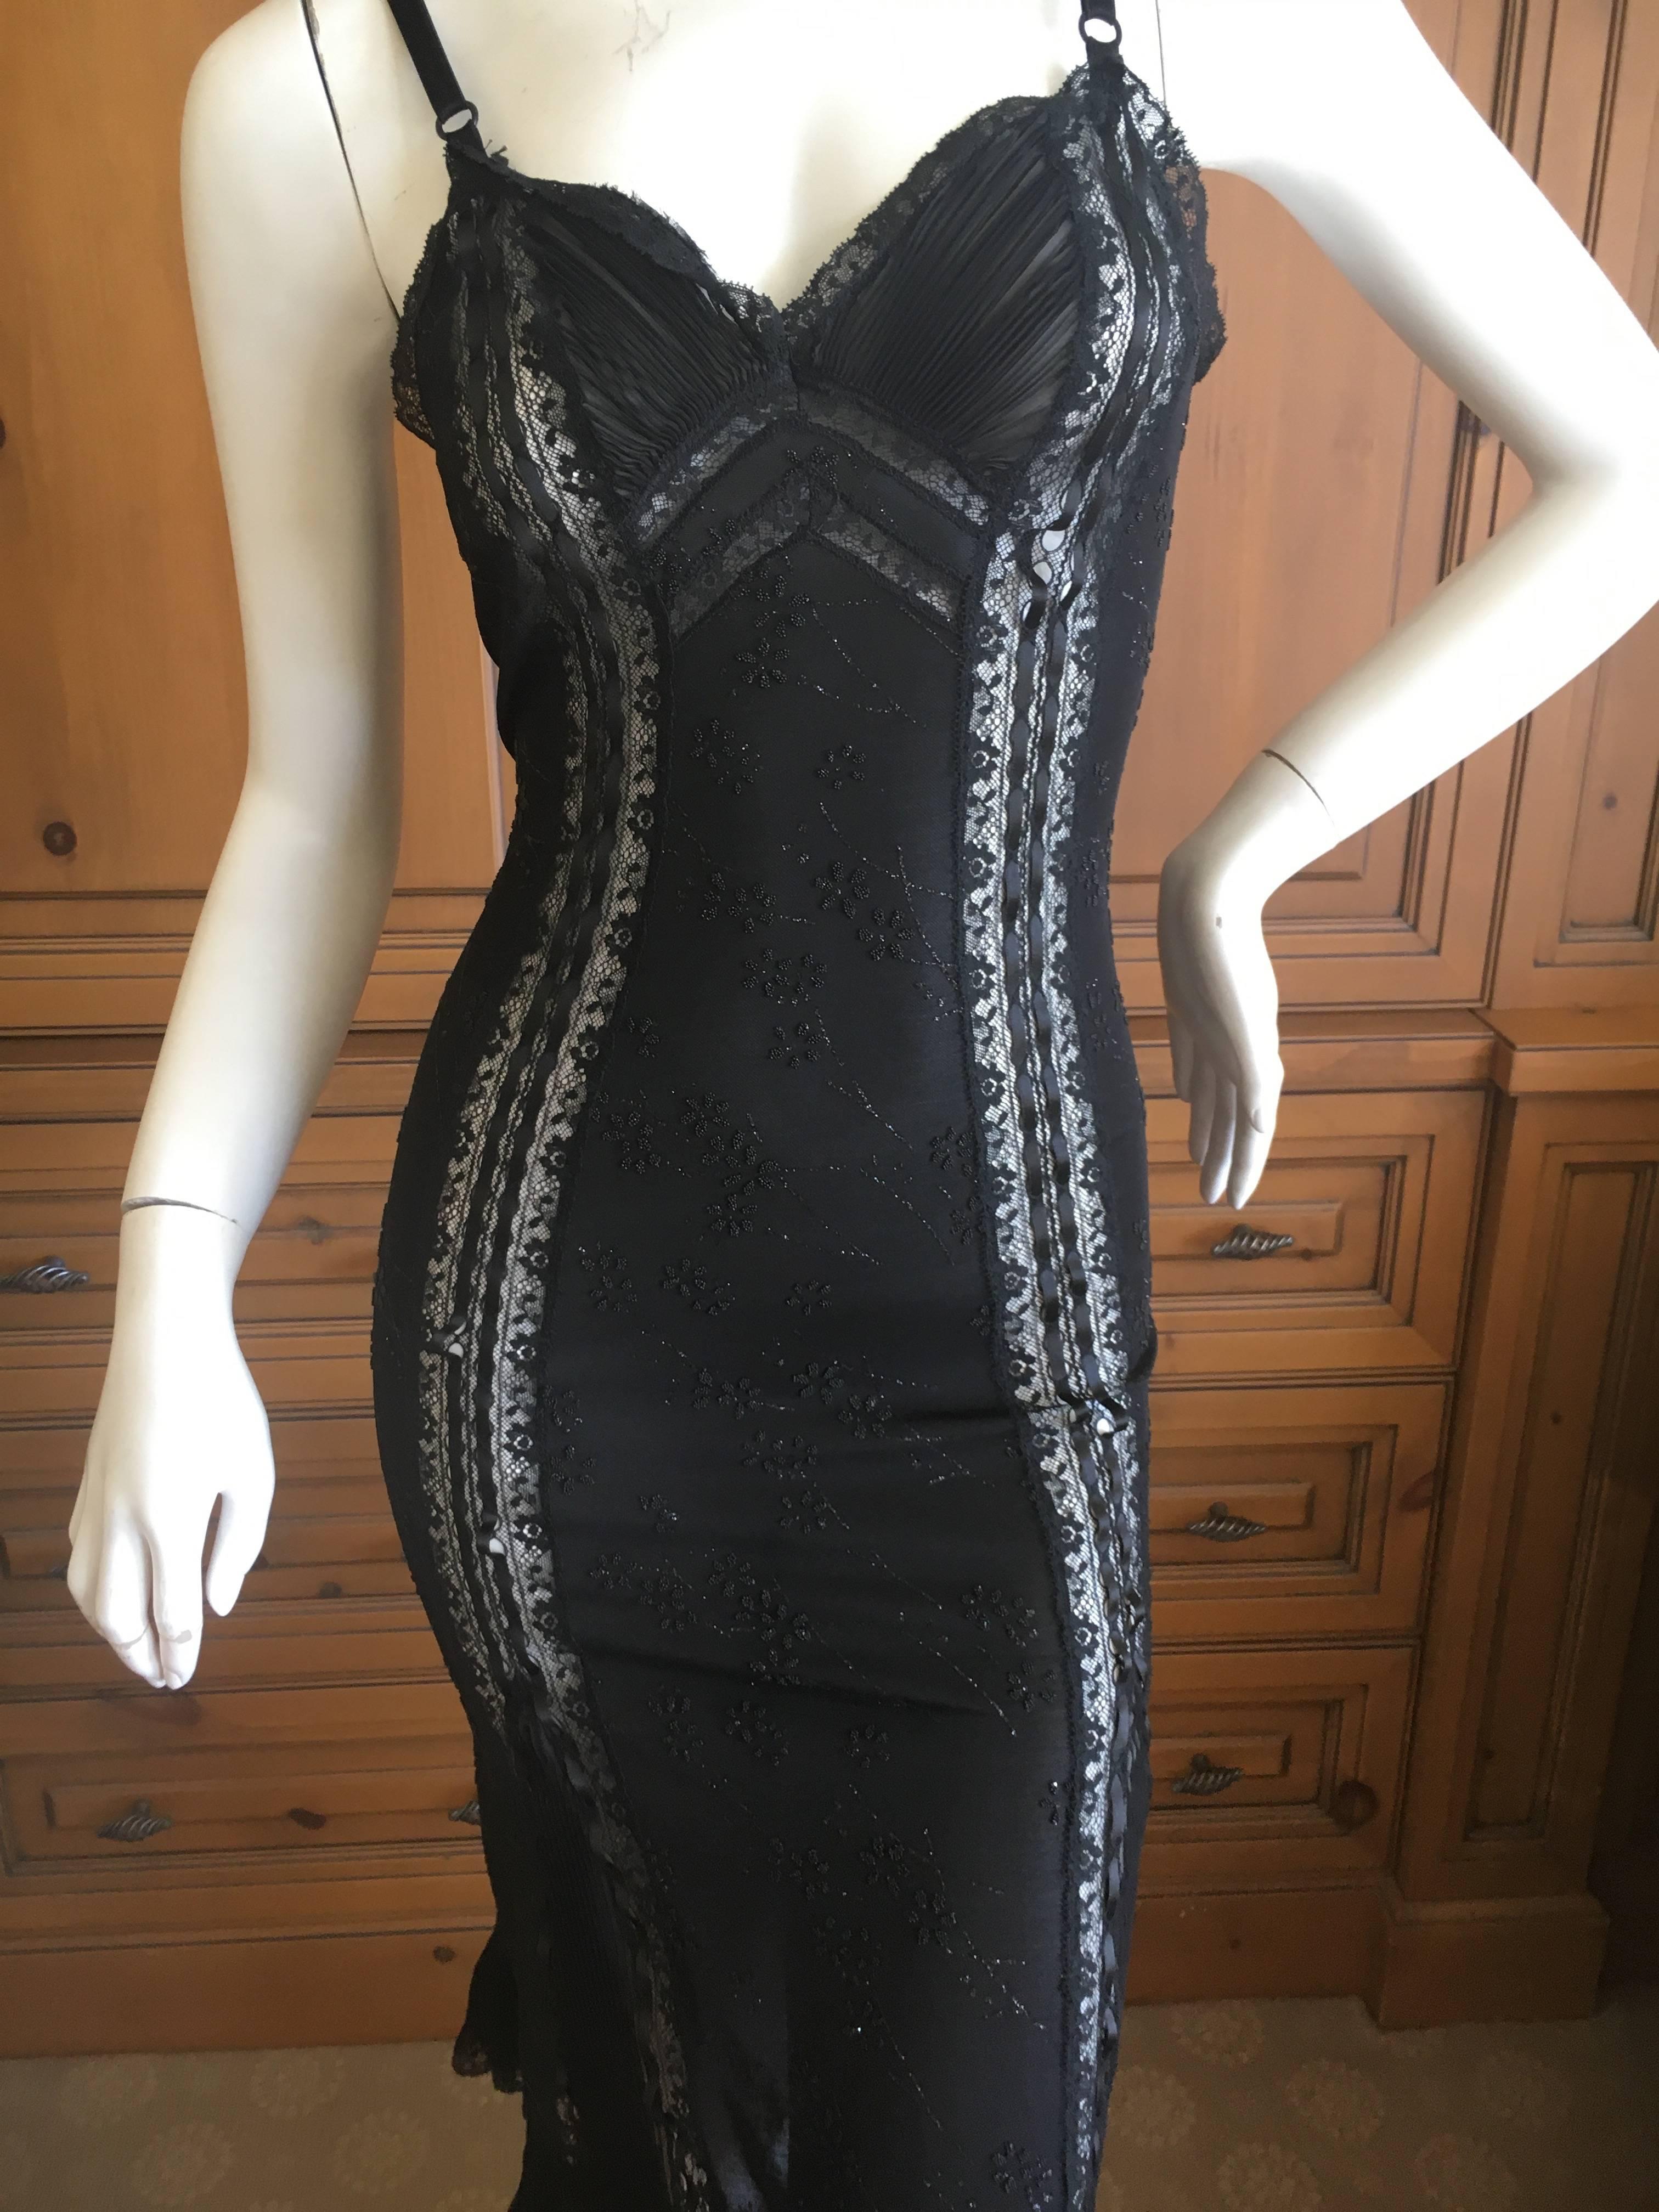 D&G Dolce & Gabbana Vintage Lace Overlay Sheer Little Black Cocktail Dress.
New with tags.
So sexy, this dress has it coming and going.
Very hard to see but this is embellished all over with tiny beads.
Size 42
Bust 36